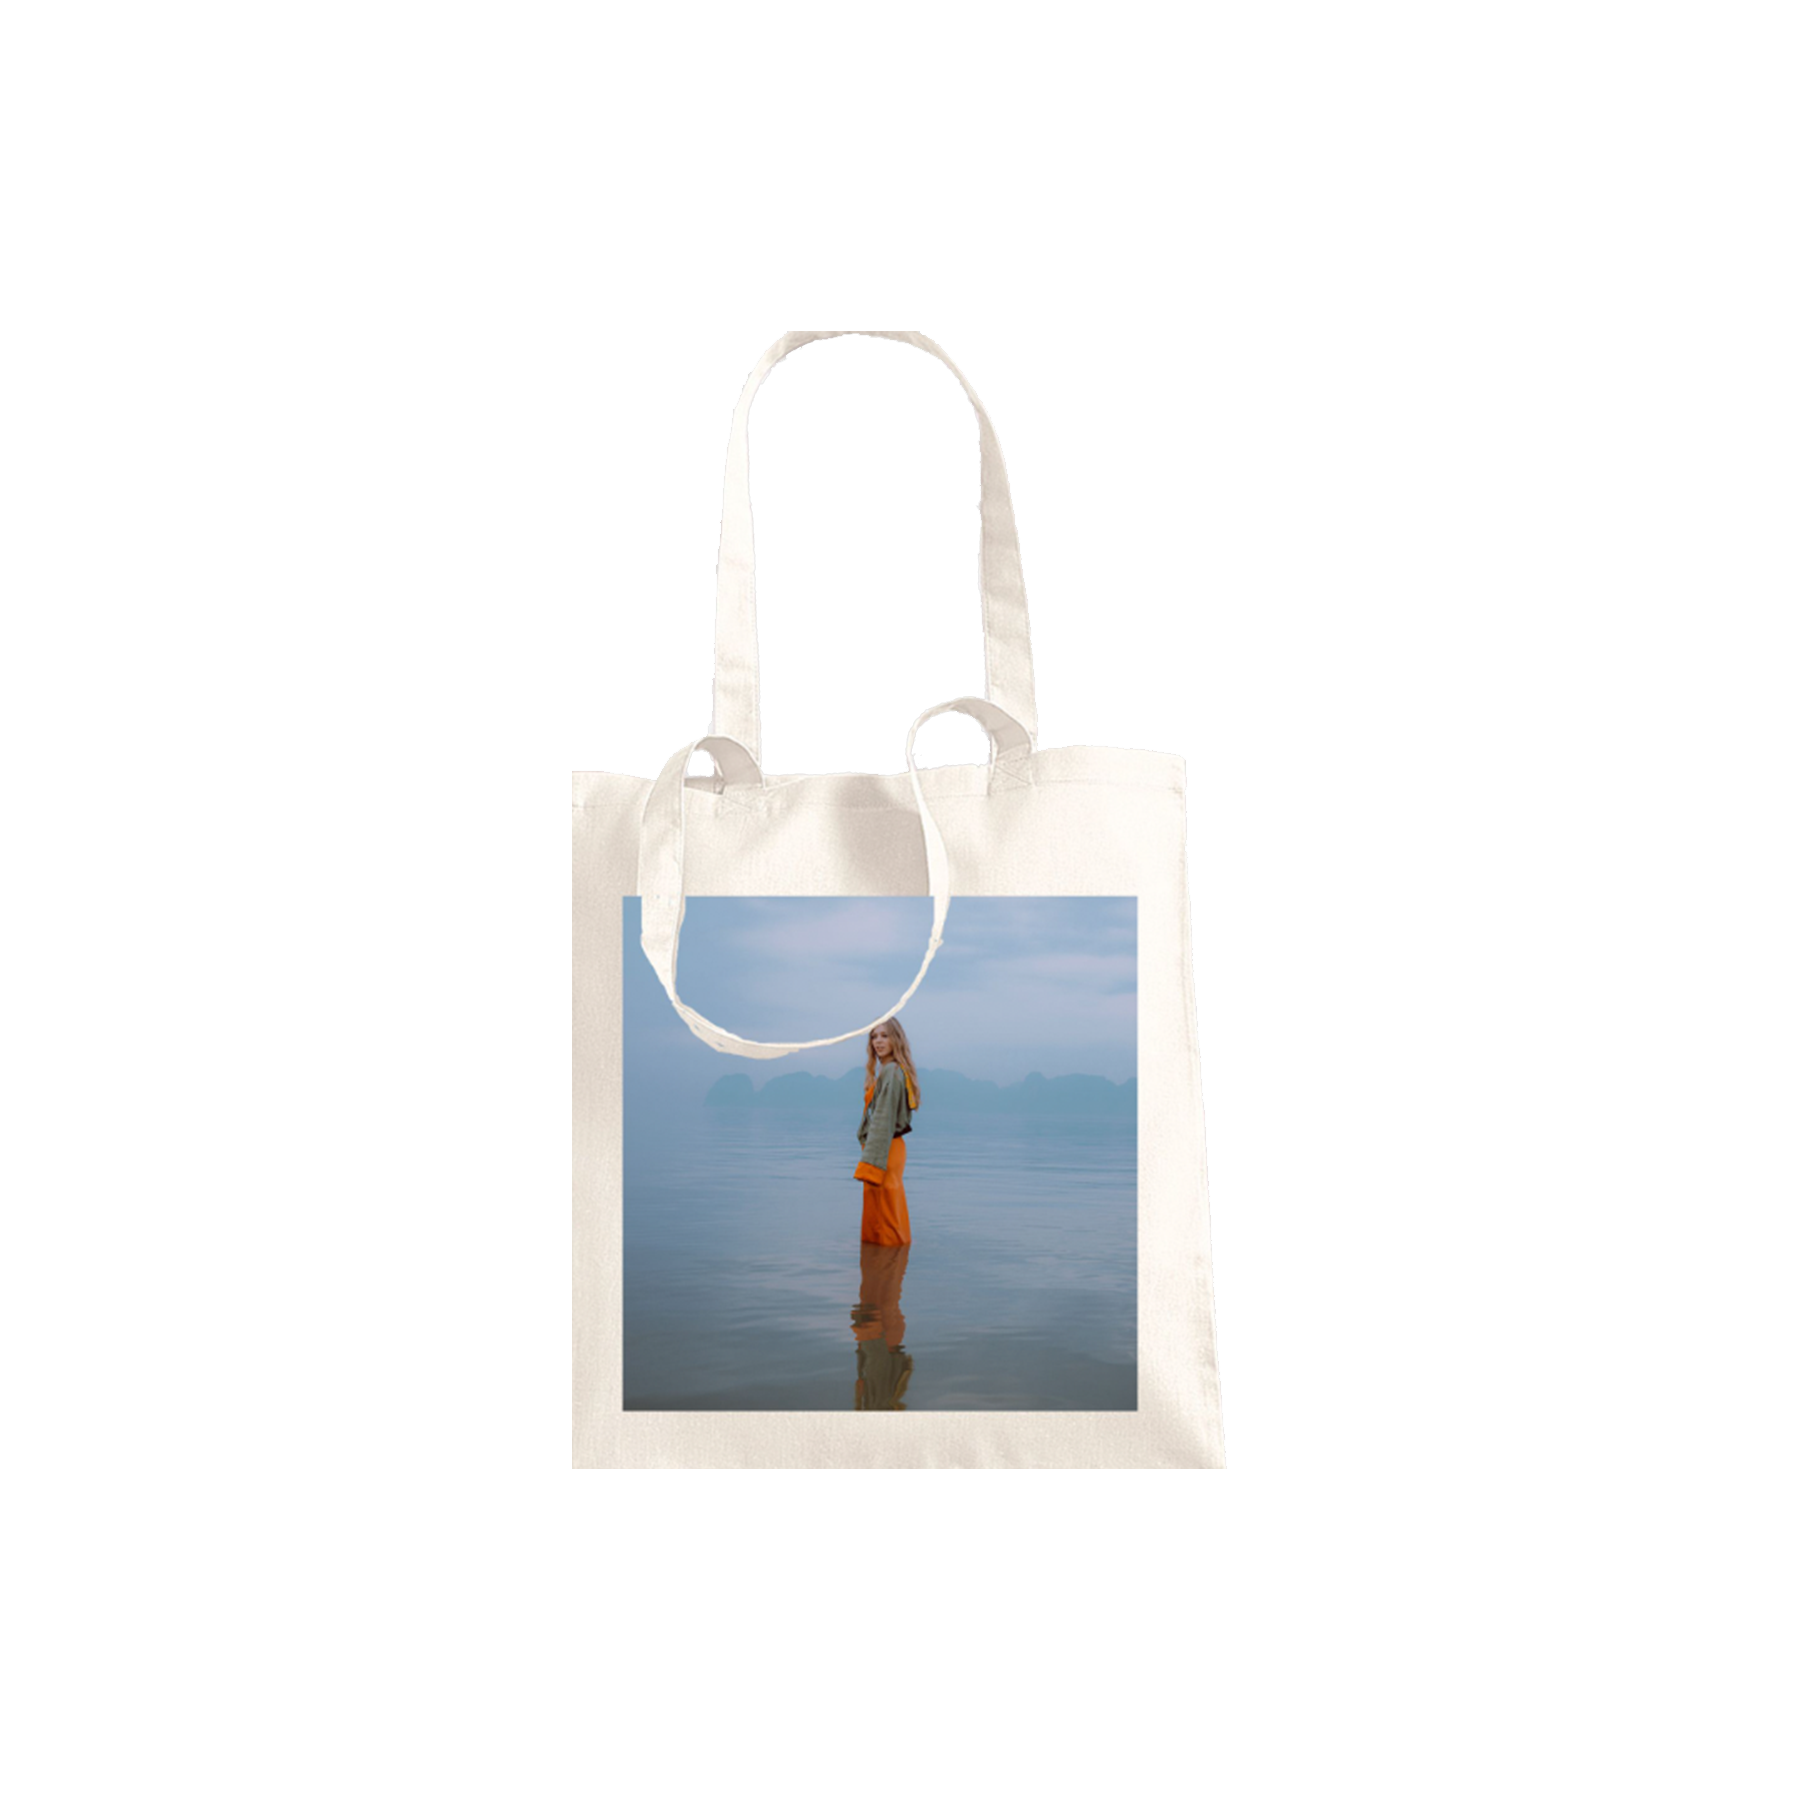 Becky Hill - Becky Hill Lake Tote Bag